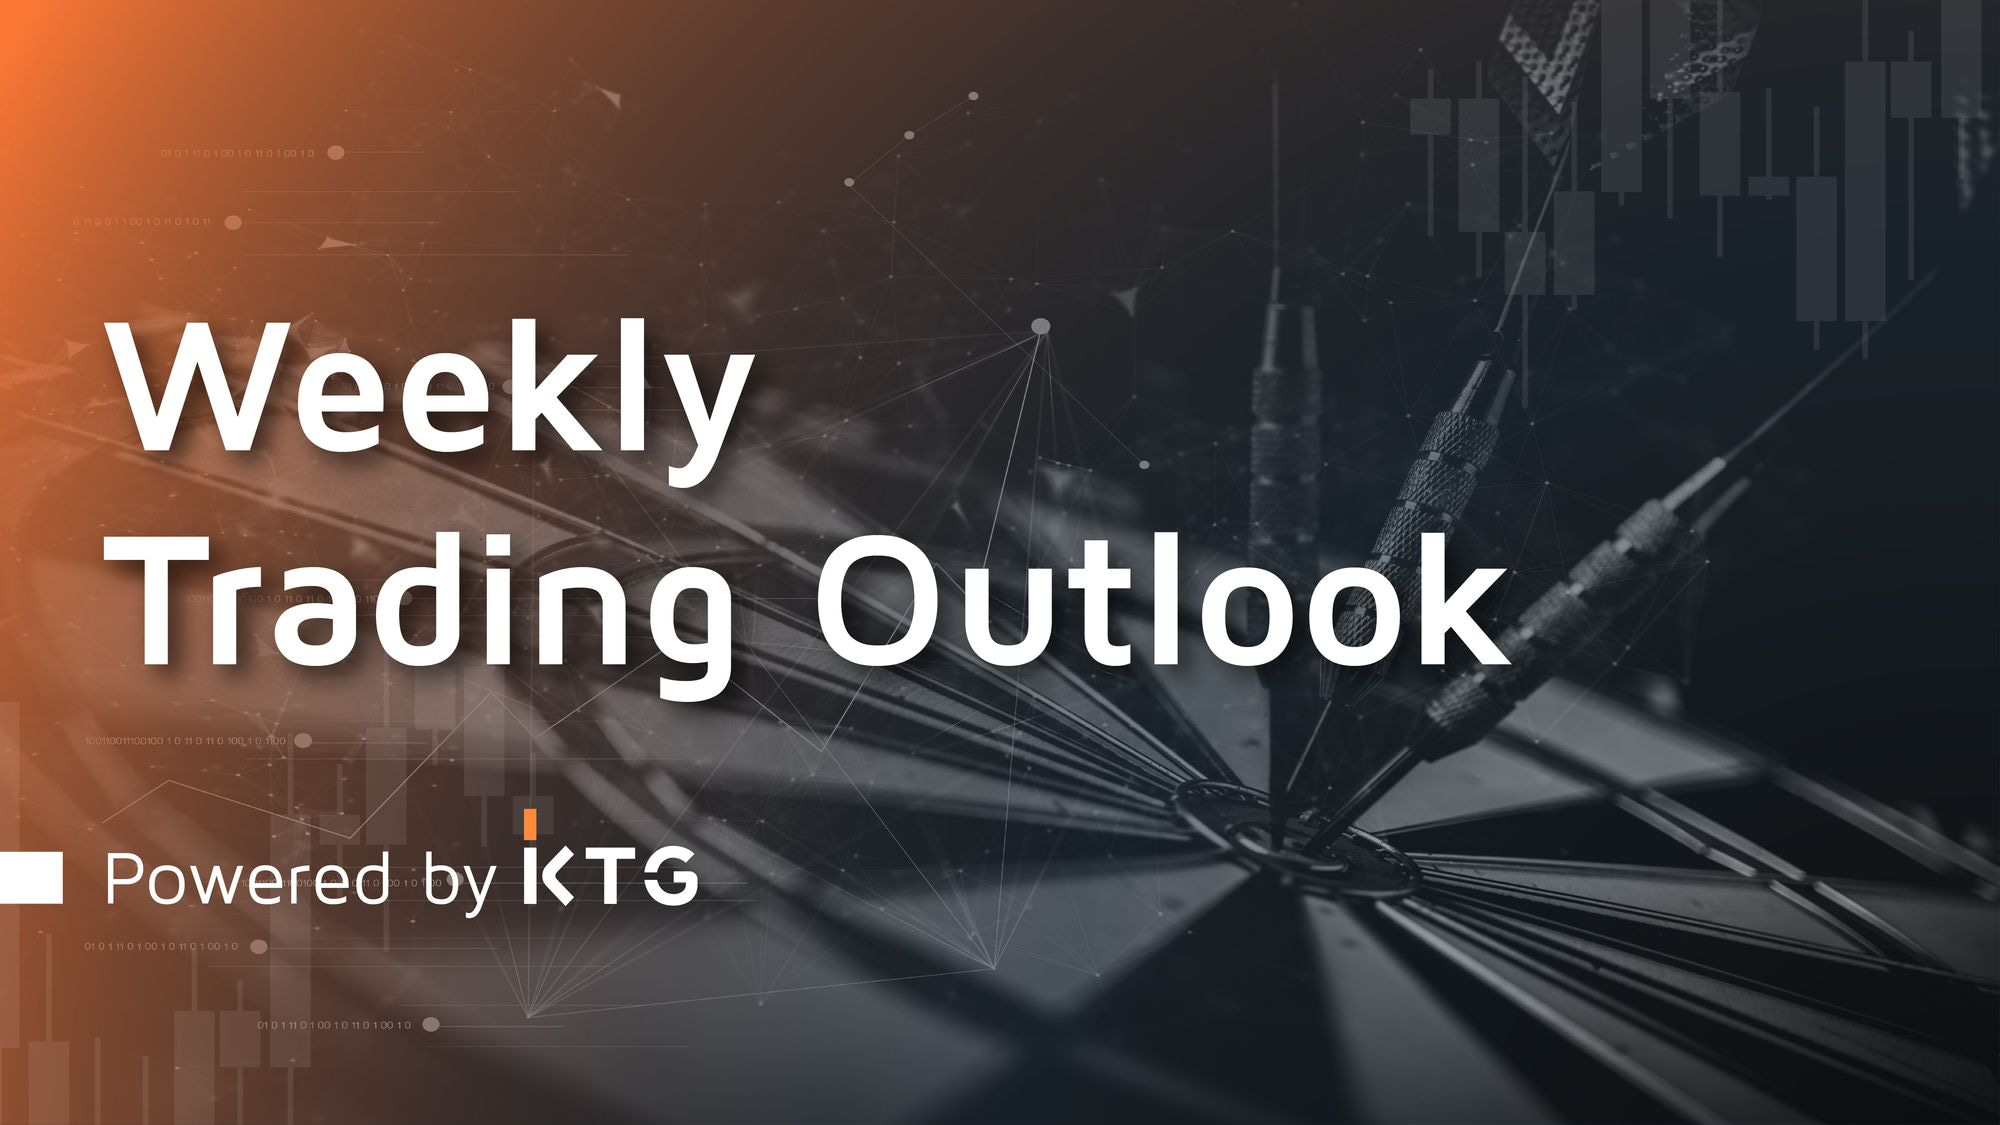 Another leg-up on BTC? - #TradingOutlook Powered by KTG